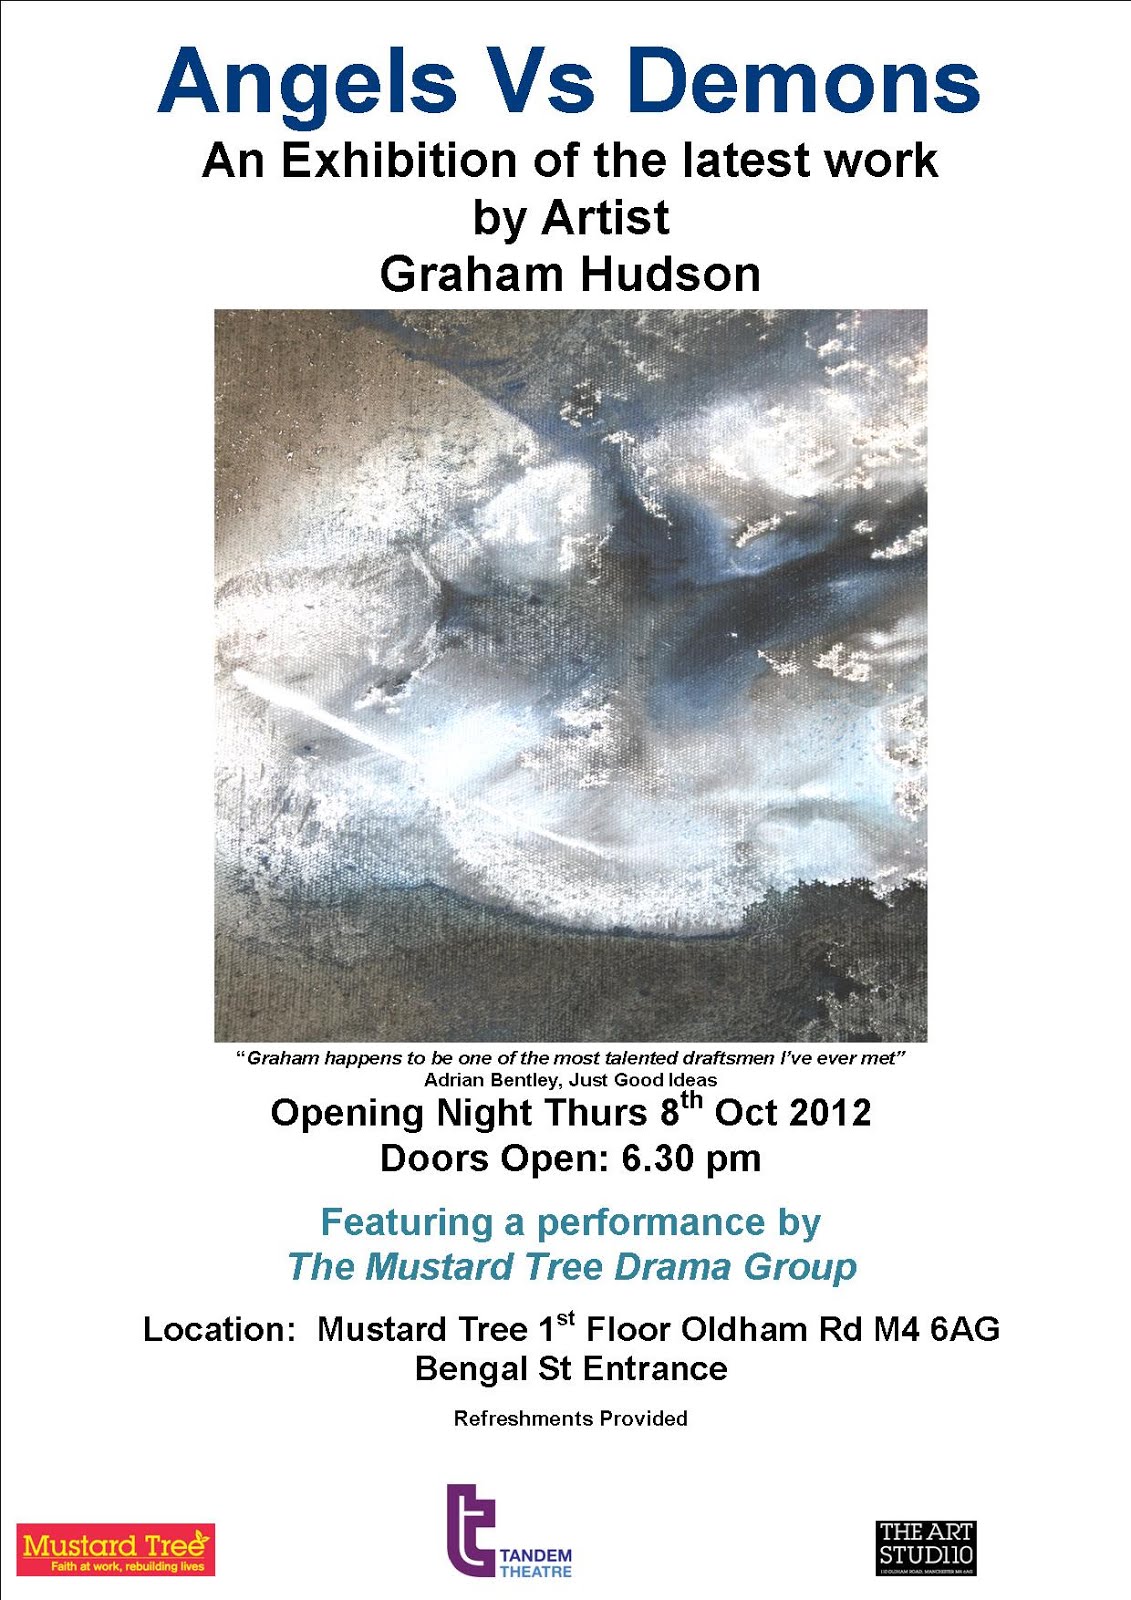 Zest Activities North Manchester Free Art Exhibition At The Mustard Tree